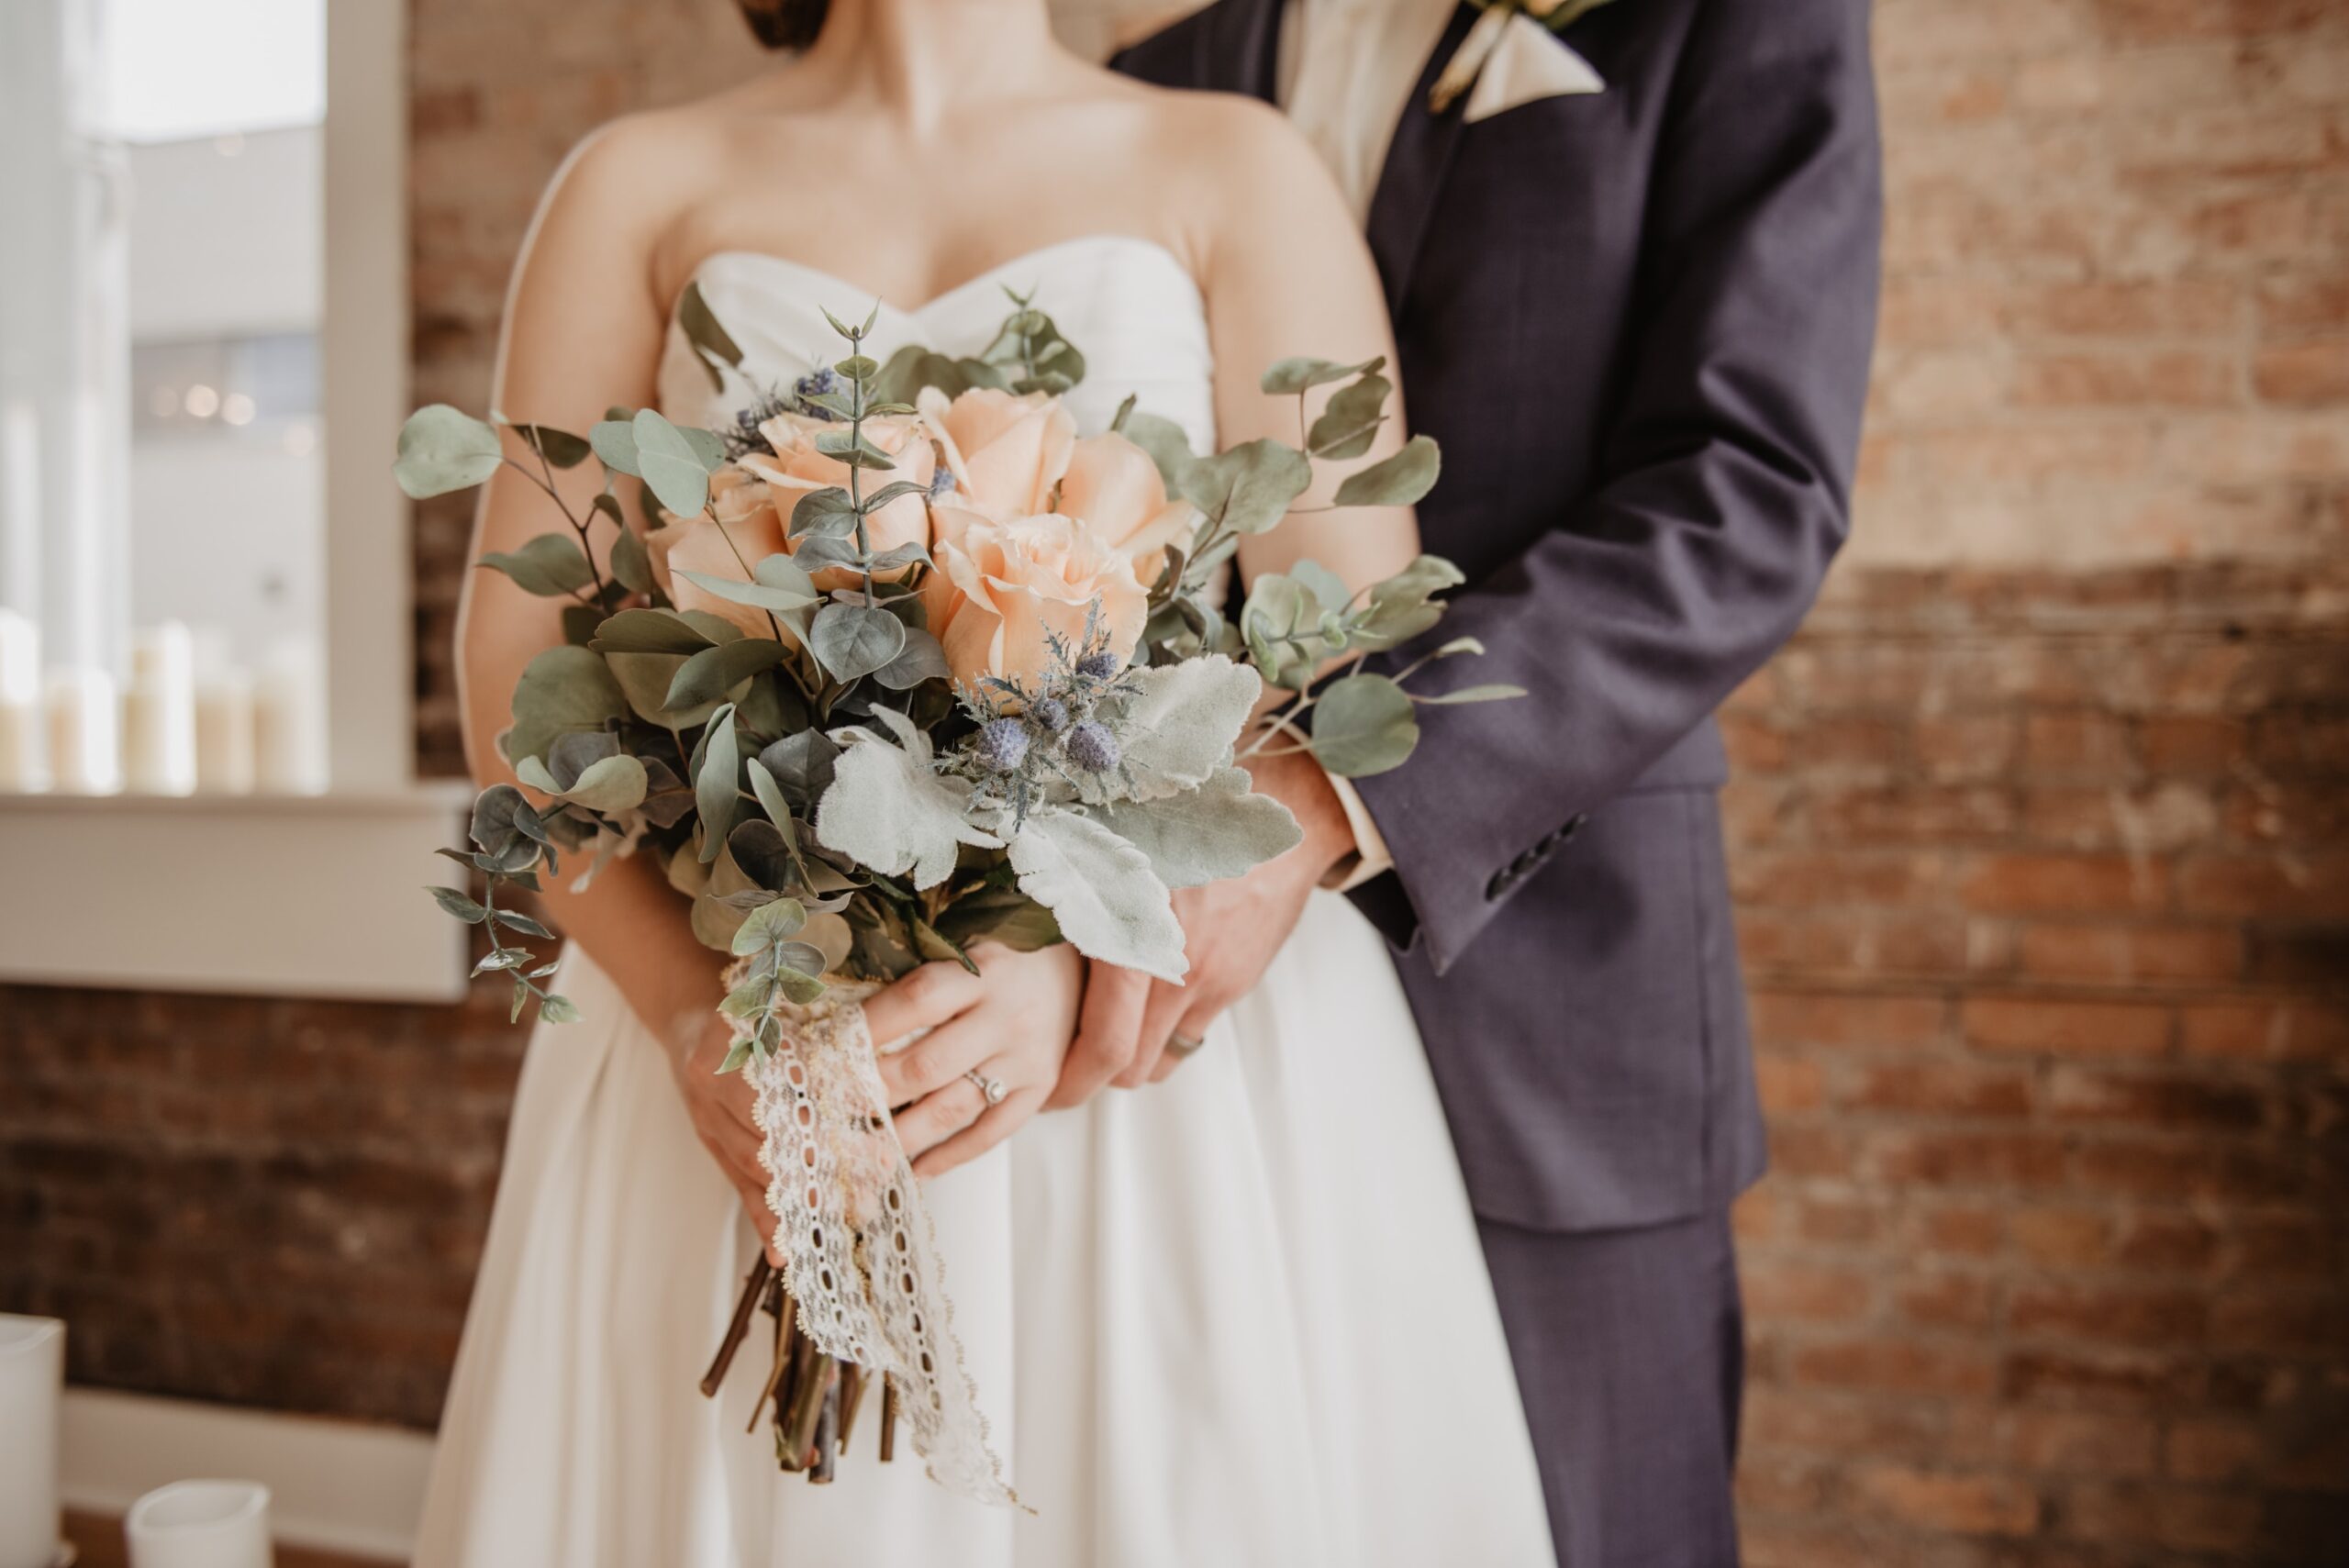 bride and groom holding bouquet on wedding day